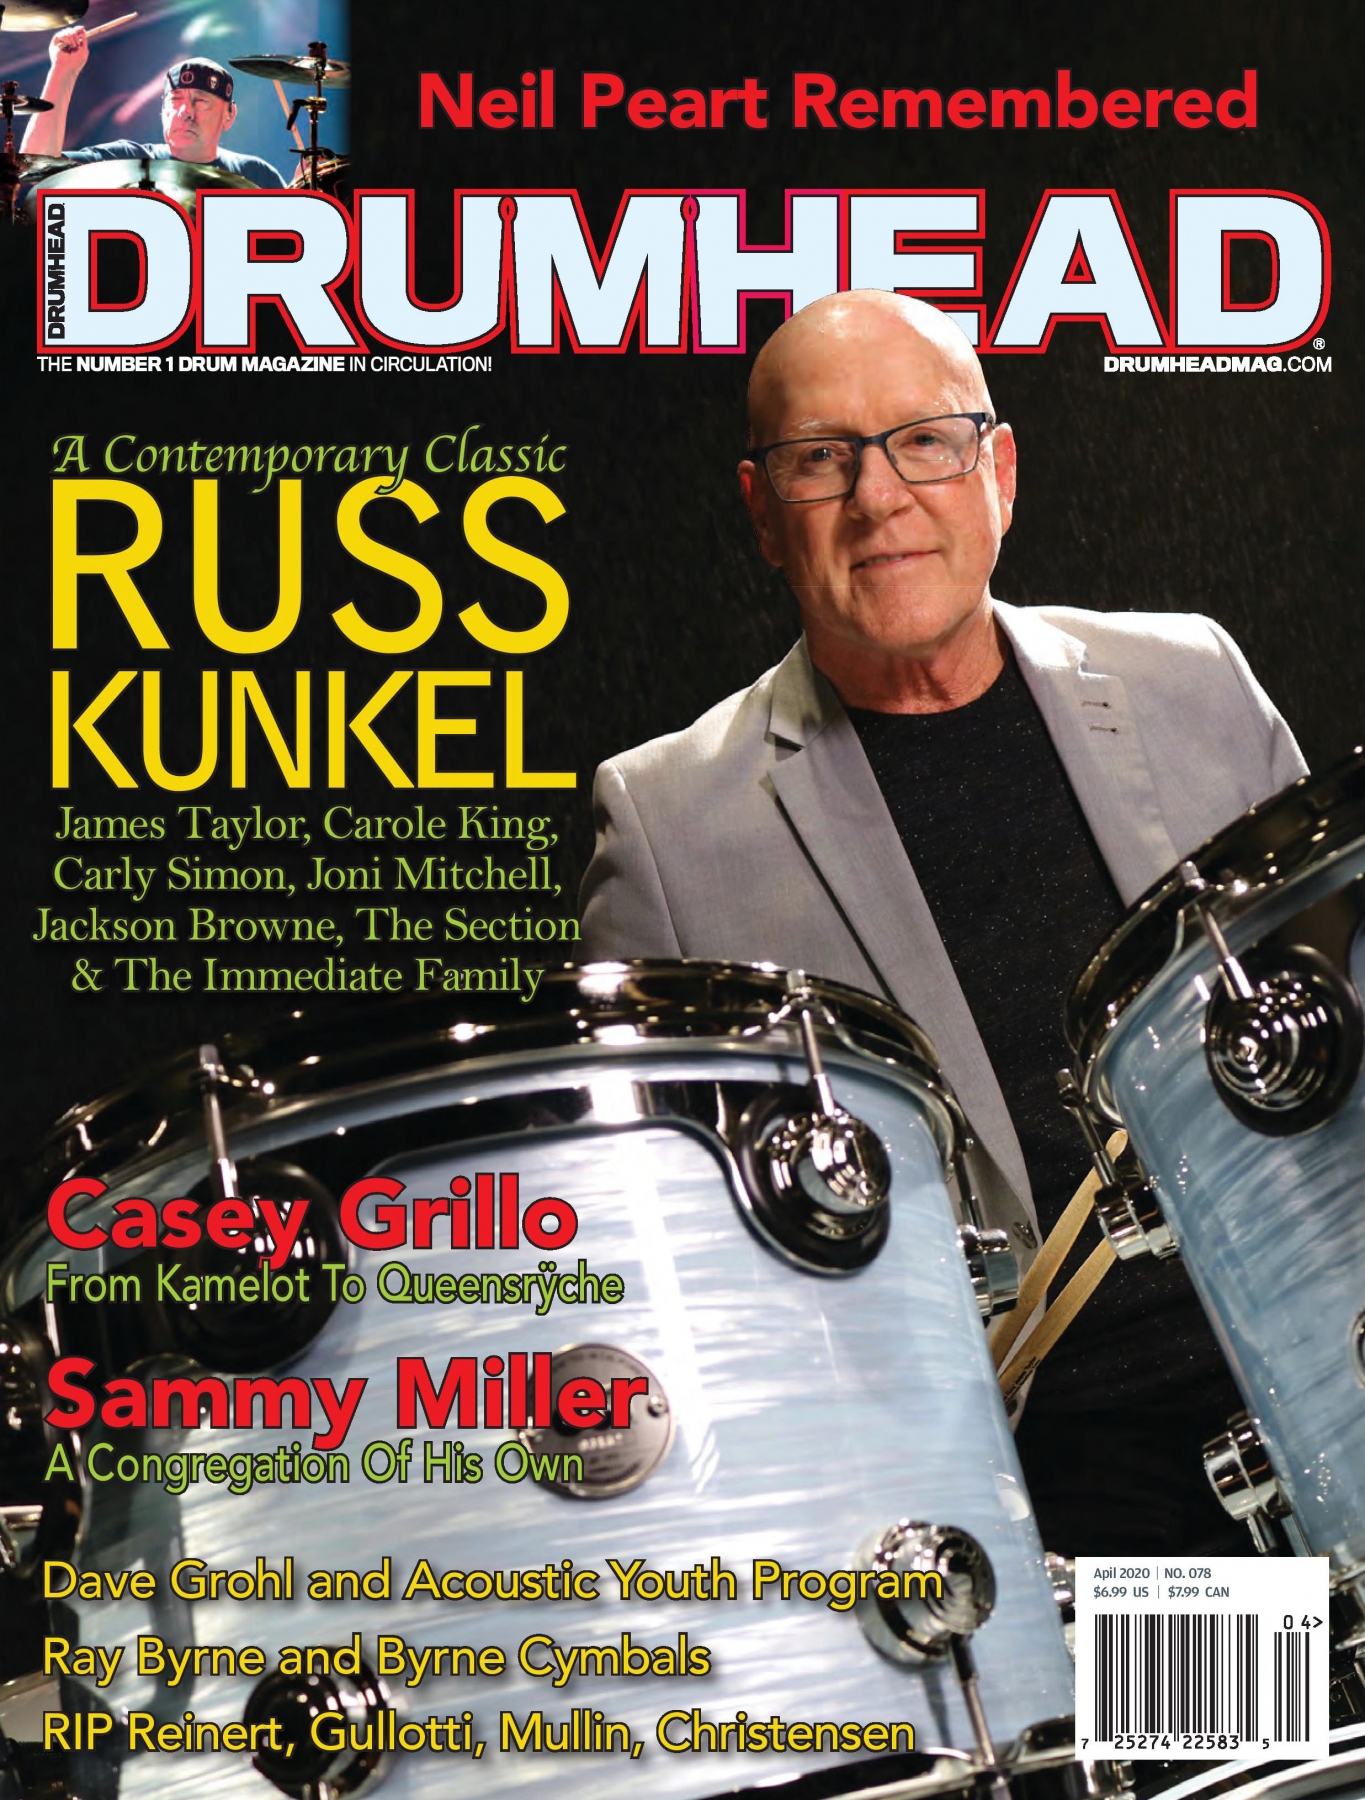 Rush is a Band Blog: Drumhead magazine pays tribute to Neil Peart in ...